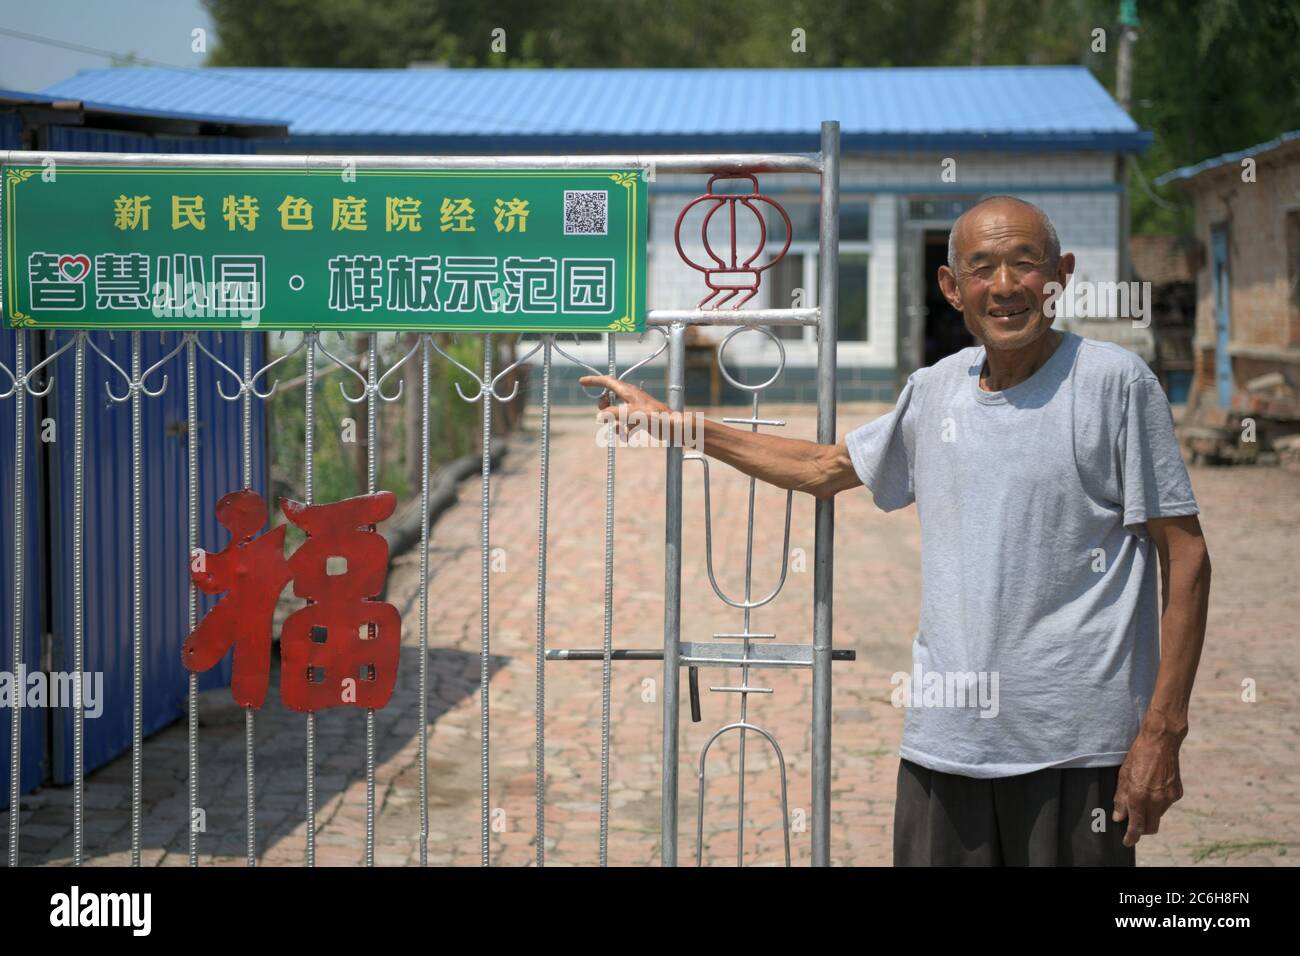 (200710) -- LINDIAN, July 10, 2020 (Xinhua) -- Tang Zhanjun, a villager whose household has shaken off poverty, introduces his home yard in Xinmin Village of Lindian County, northeast China's Heilongjiang Province, July 9, 2020.  Local authorities of Lindian have guided local villagers to plant vegetables at their own house yards and help them expand distribution channels, as a way to help them increase incomes and shake off poverty. A total of 14,000 households, including 3,000 poverty-stricken households, have engaged in home yards planting. (Xinhua/Wang Jianwei) Stock Photo